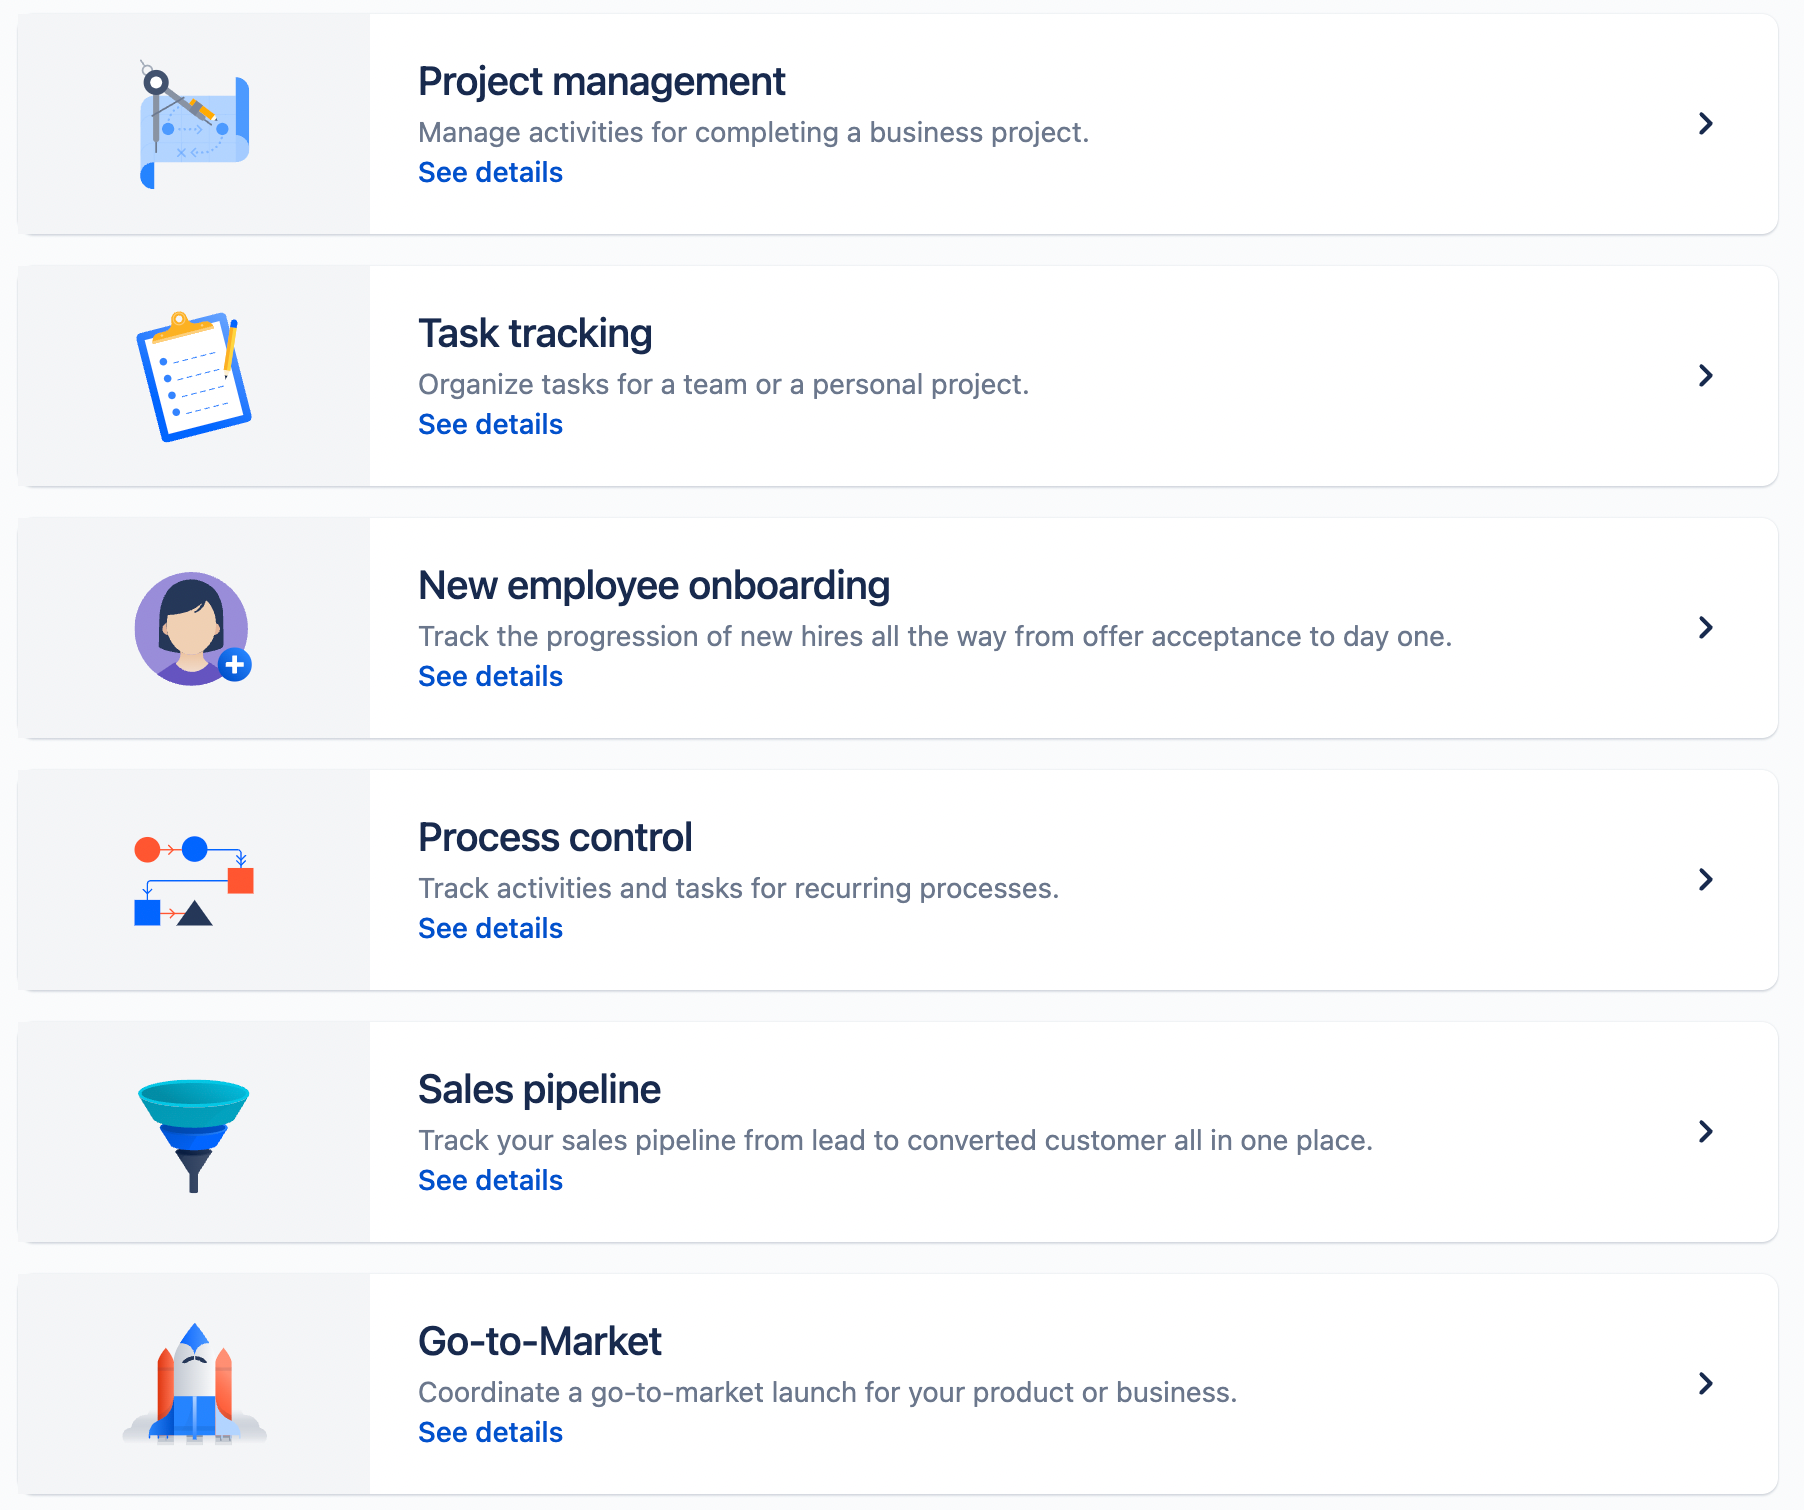 How to create a Jira project